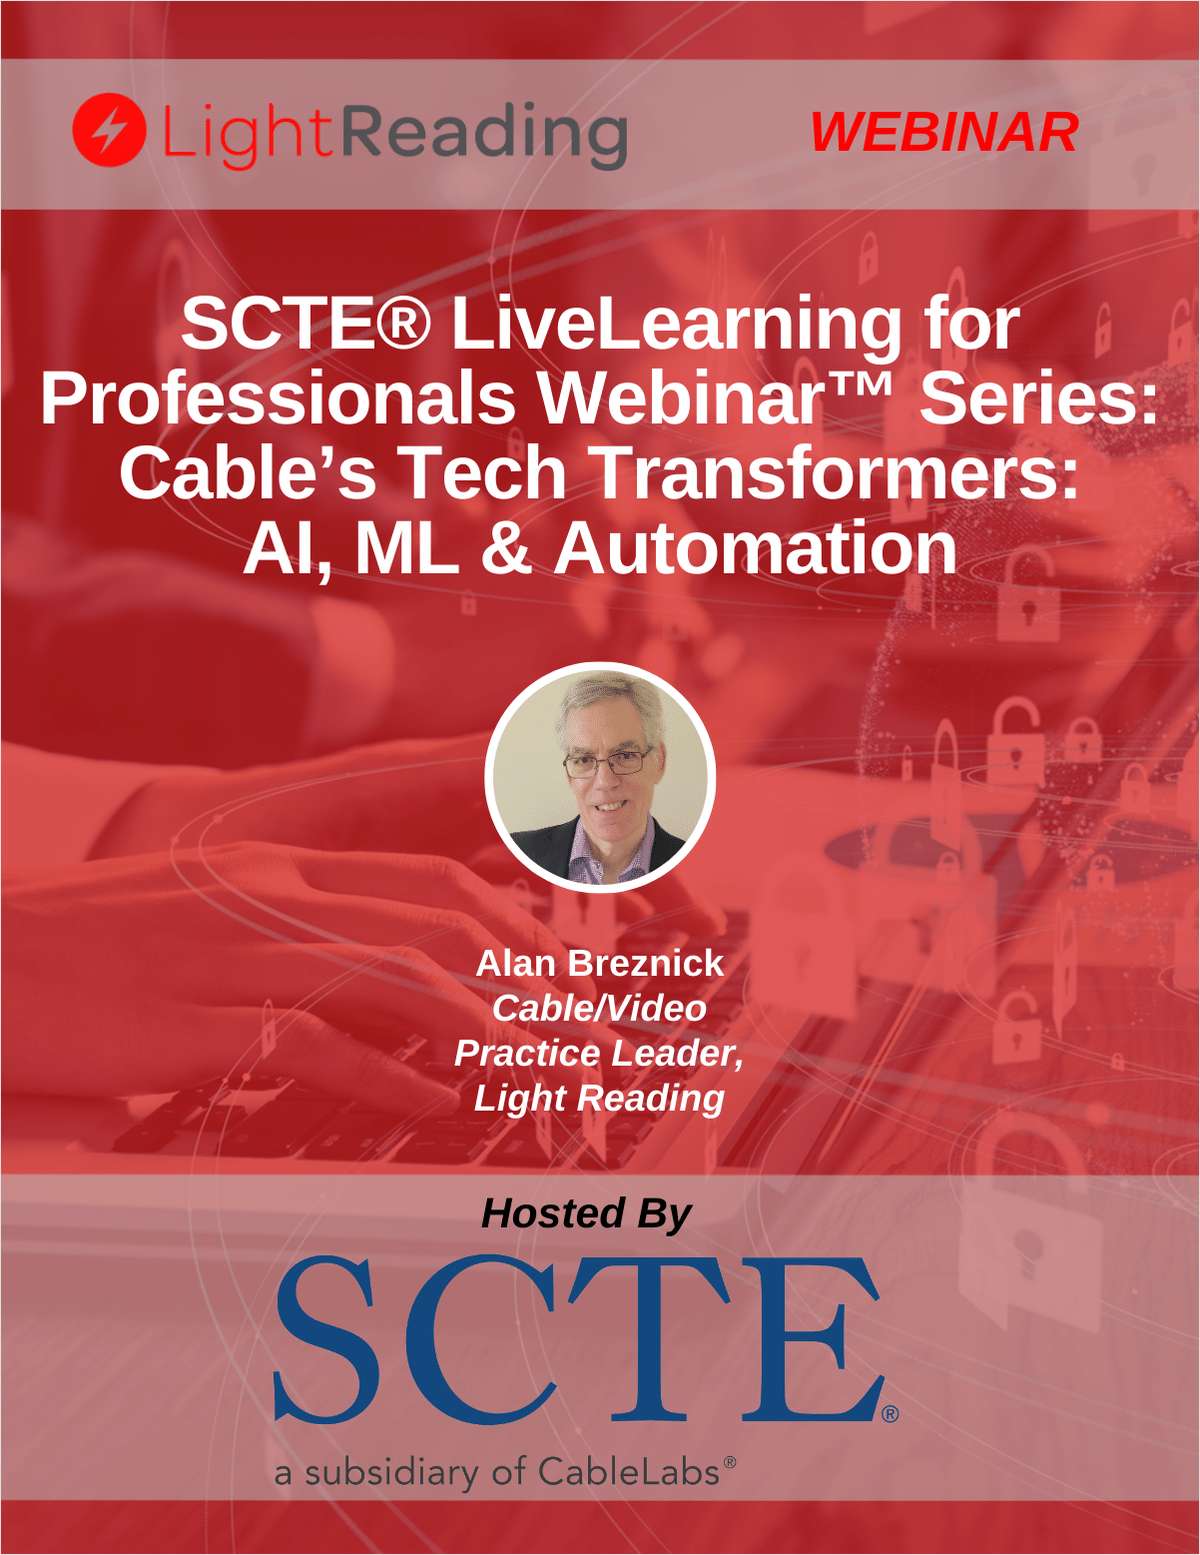 SCTE® LiveLearning for Professionals Webinar™ Series: Cable's Tech Transformers: AI, ML & Automation